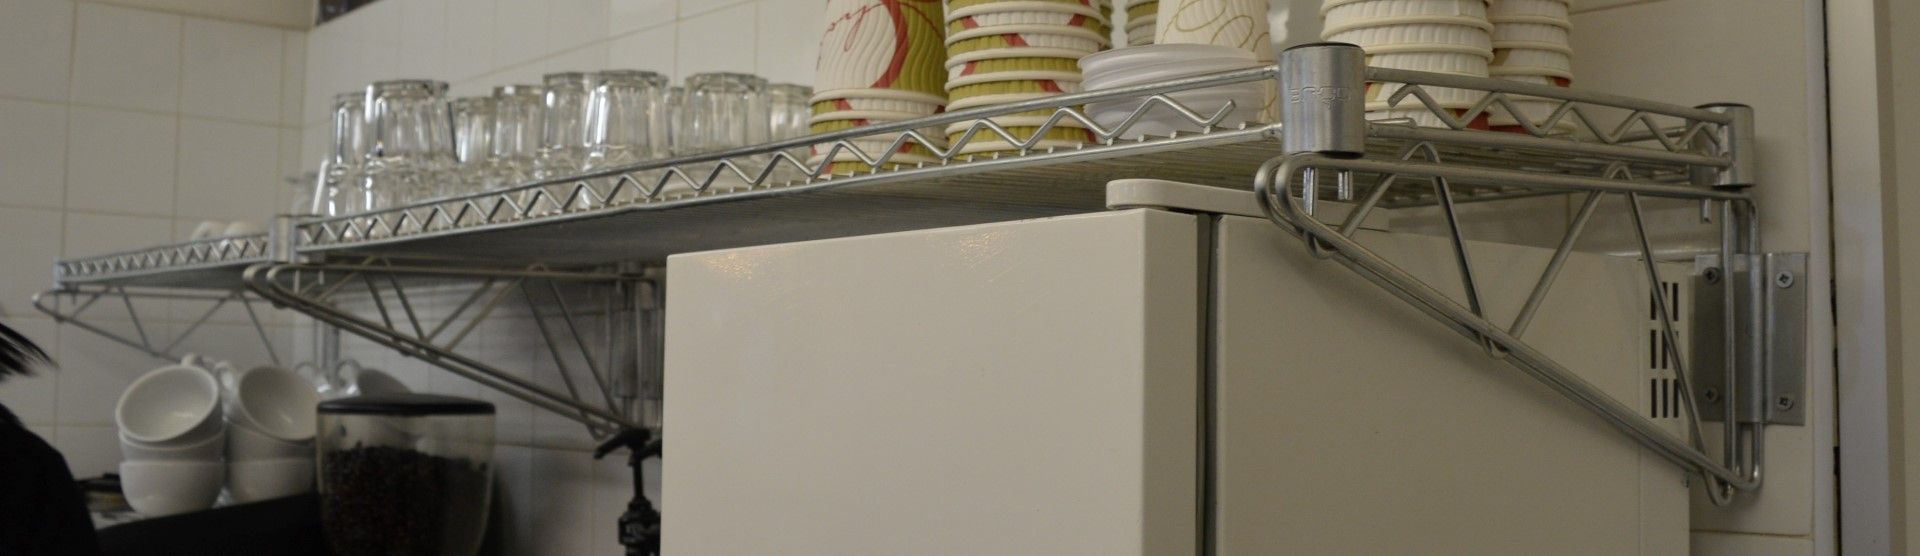 3 x Vogue Wall Mounted Shelving Units - Width 120/90 x Depth 37 cms - Ideal For Commercial Kitchens, - Image 6 of 6